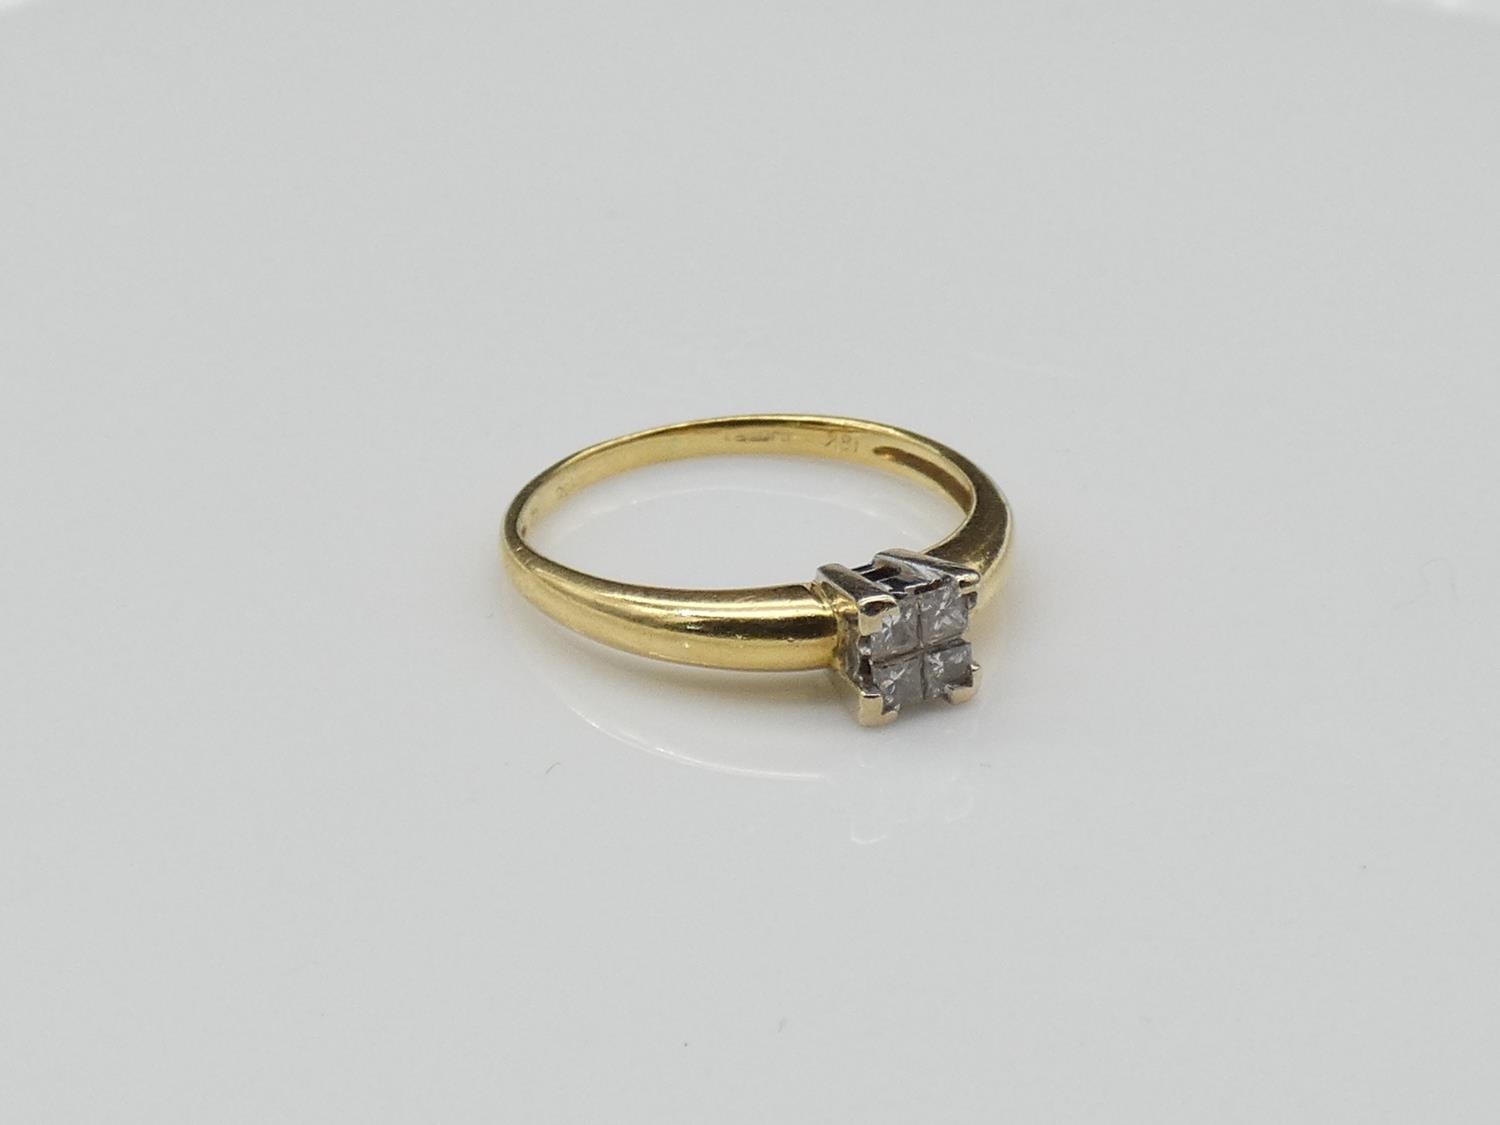 A vintage 18 carat yellow gold, platinum and diamond ring. Set with four square princess cut